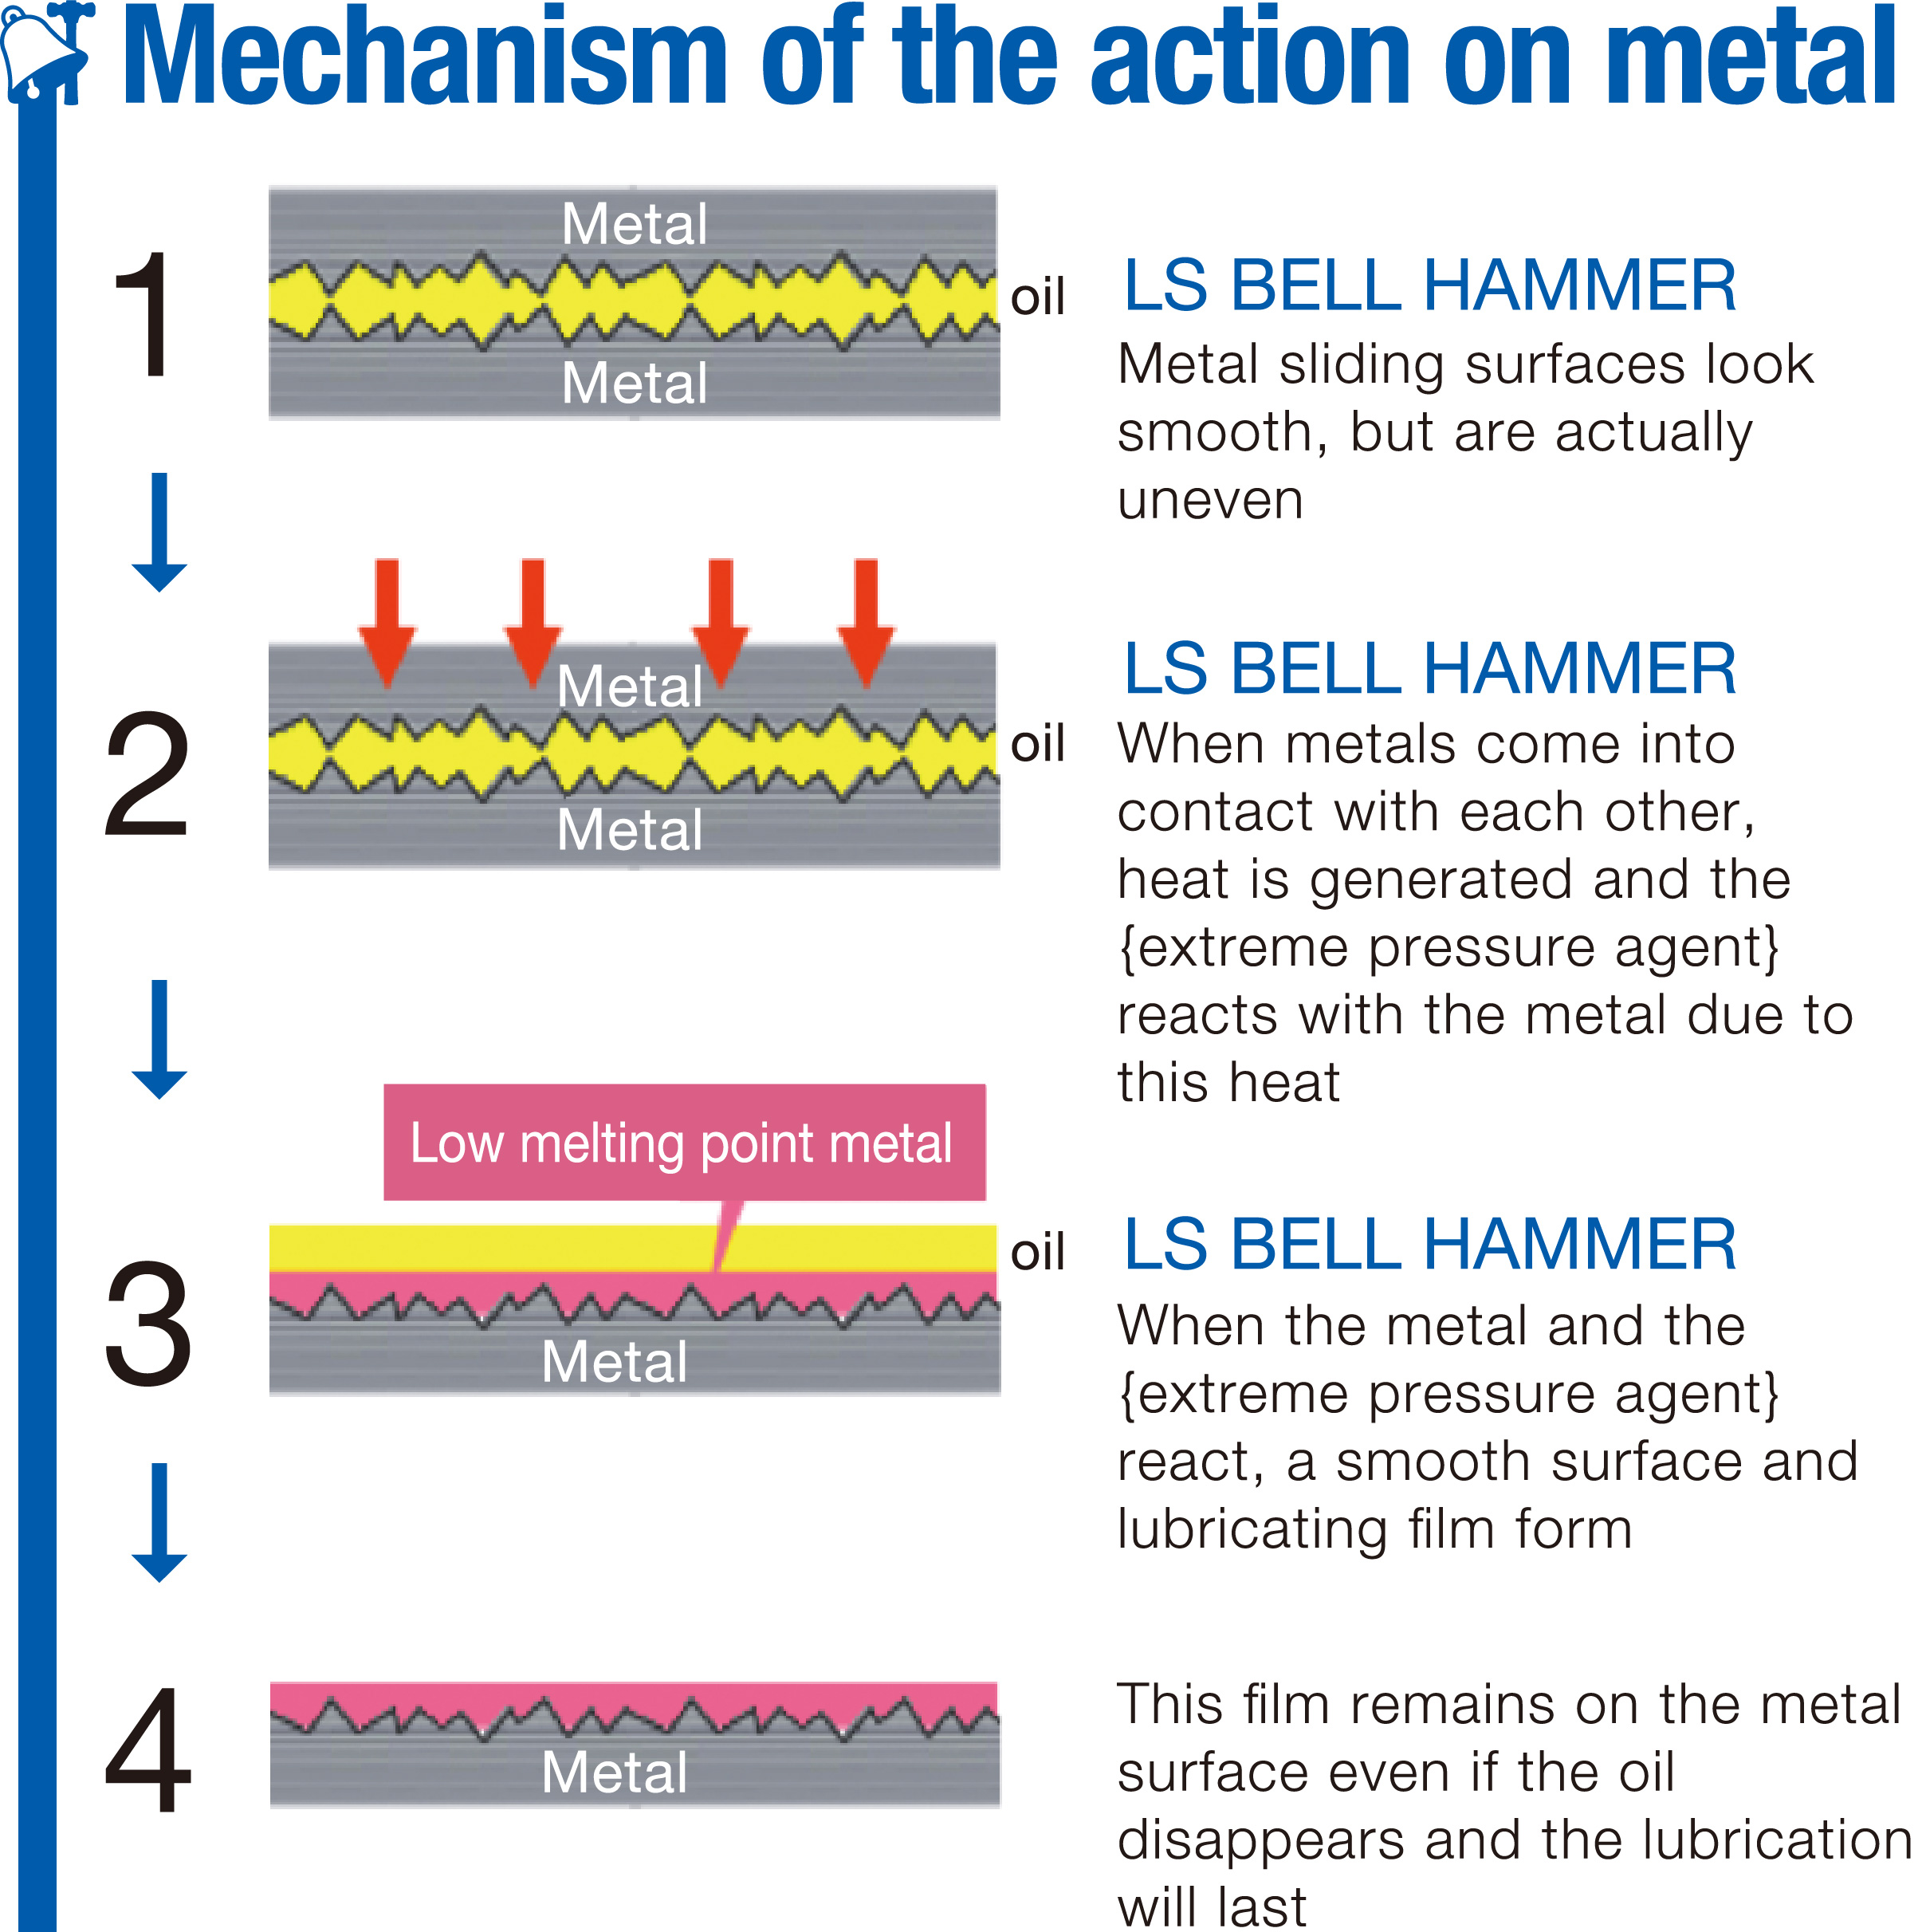 Mechanism of the action on metal